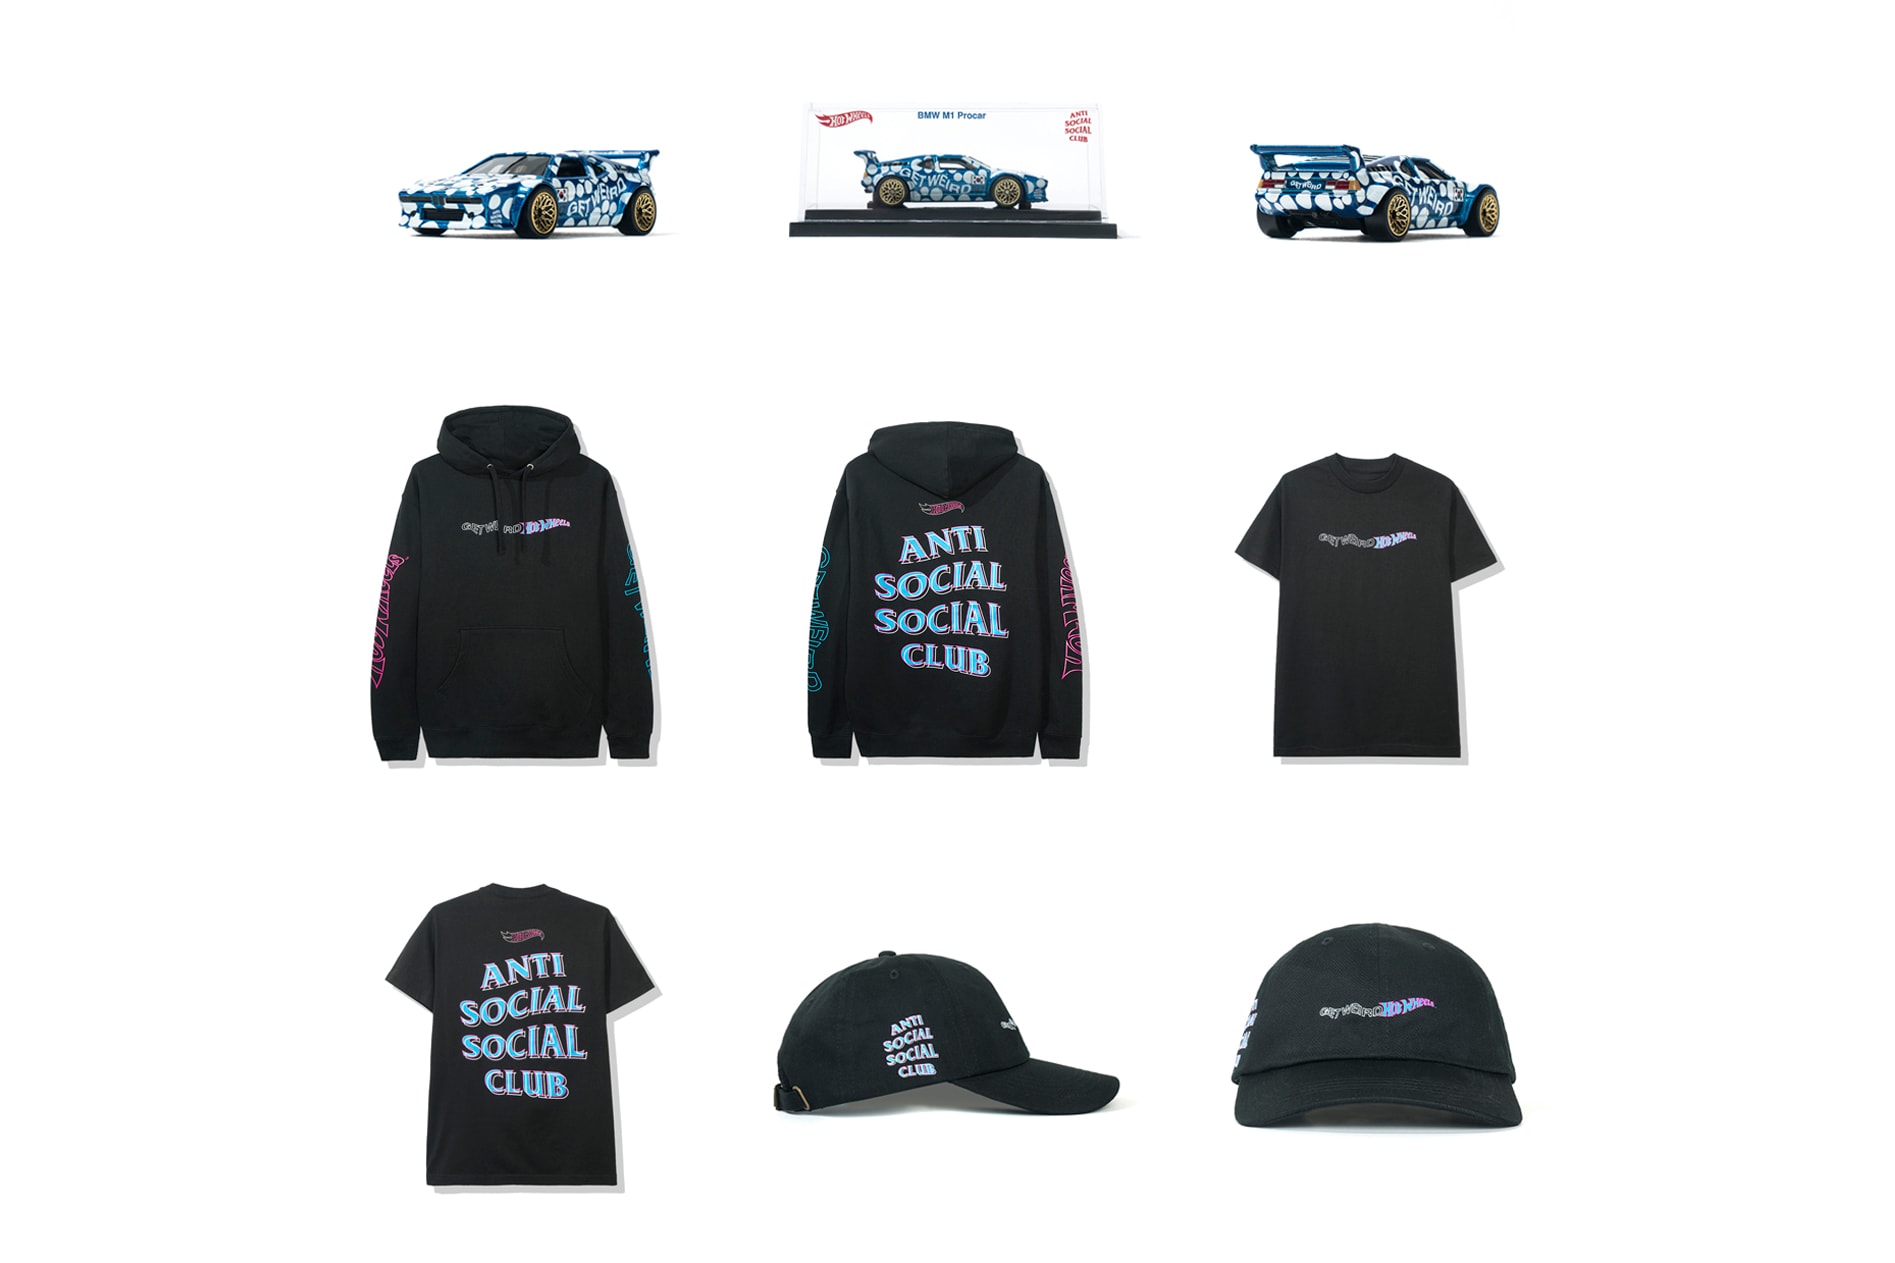 Anti Social Social Club Teases Hot Wheels Collaborations toy cars clothing 